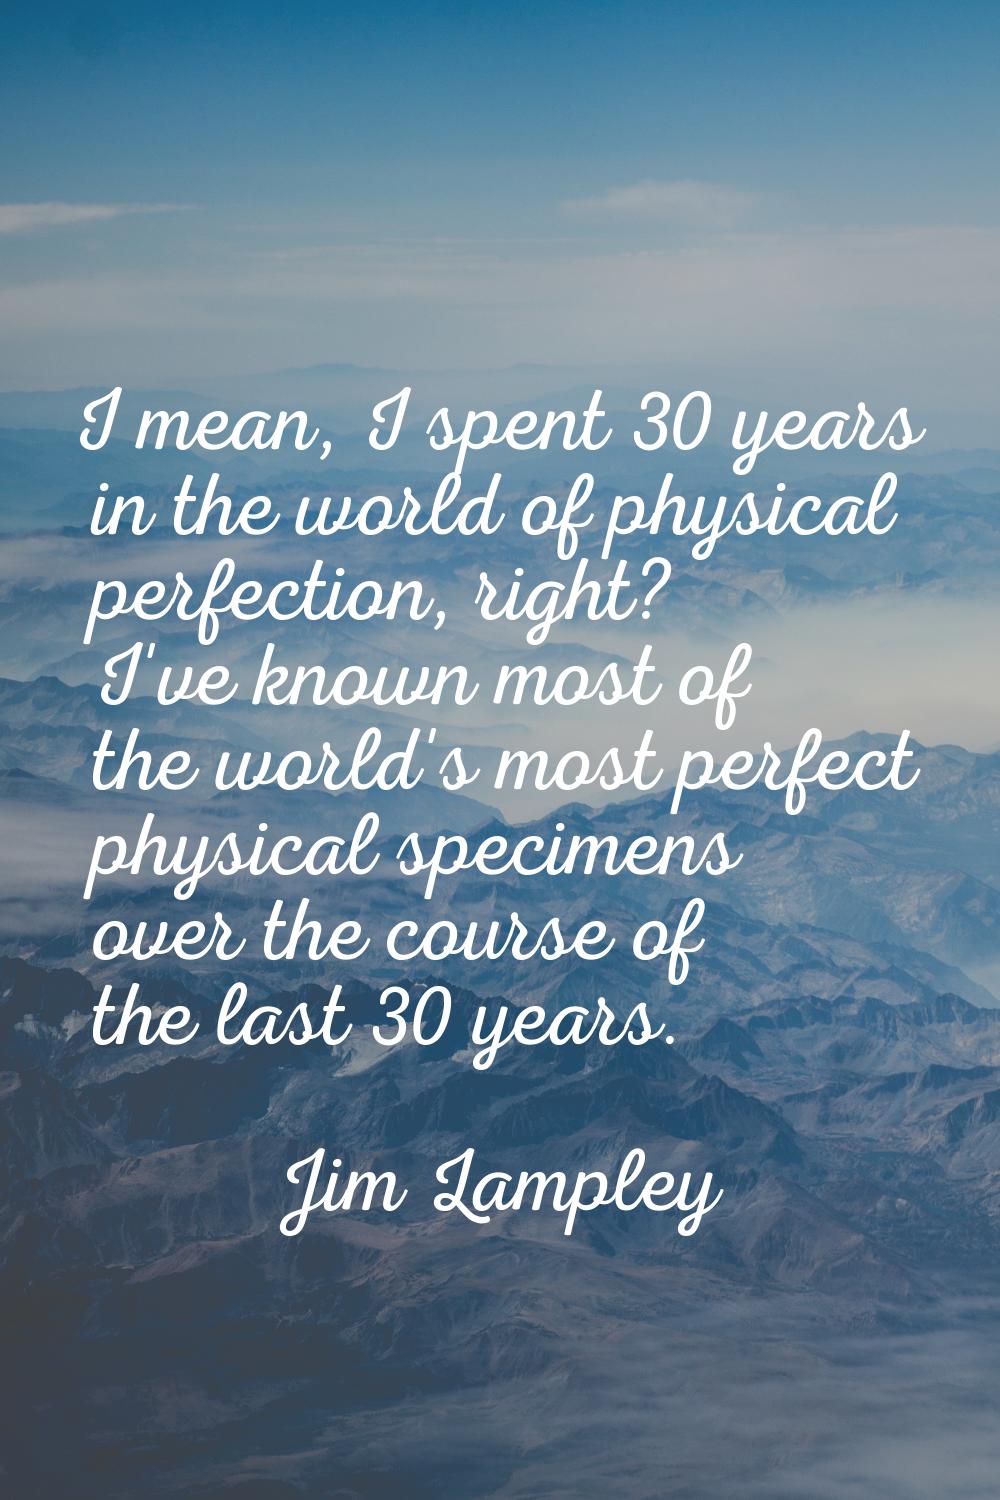 I mean, I spent 30 years in the world of physical perfection, right? I've known most of the world's